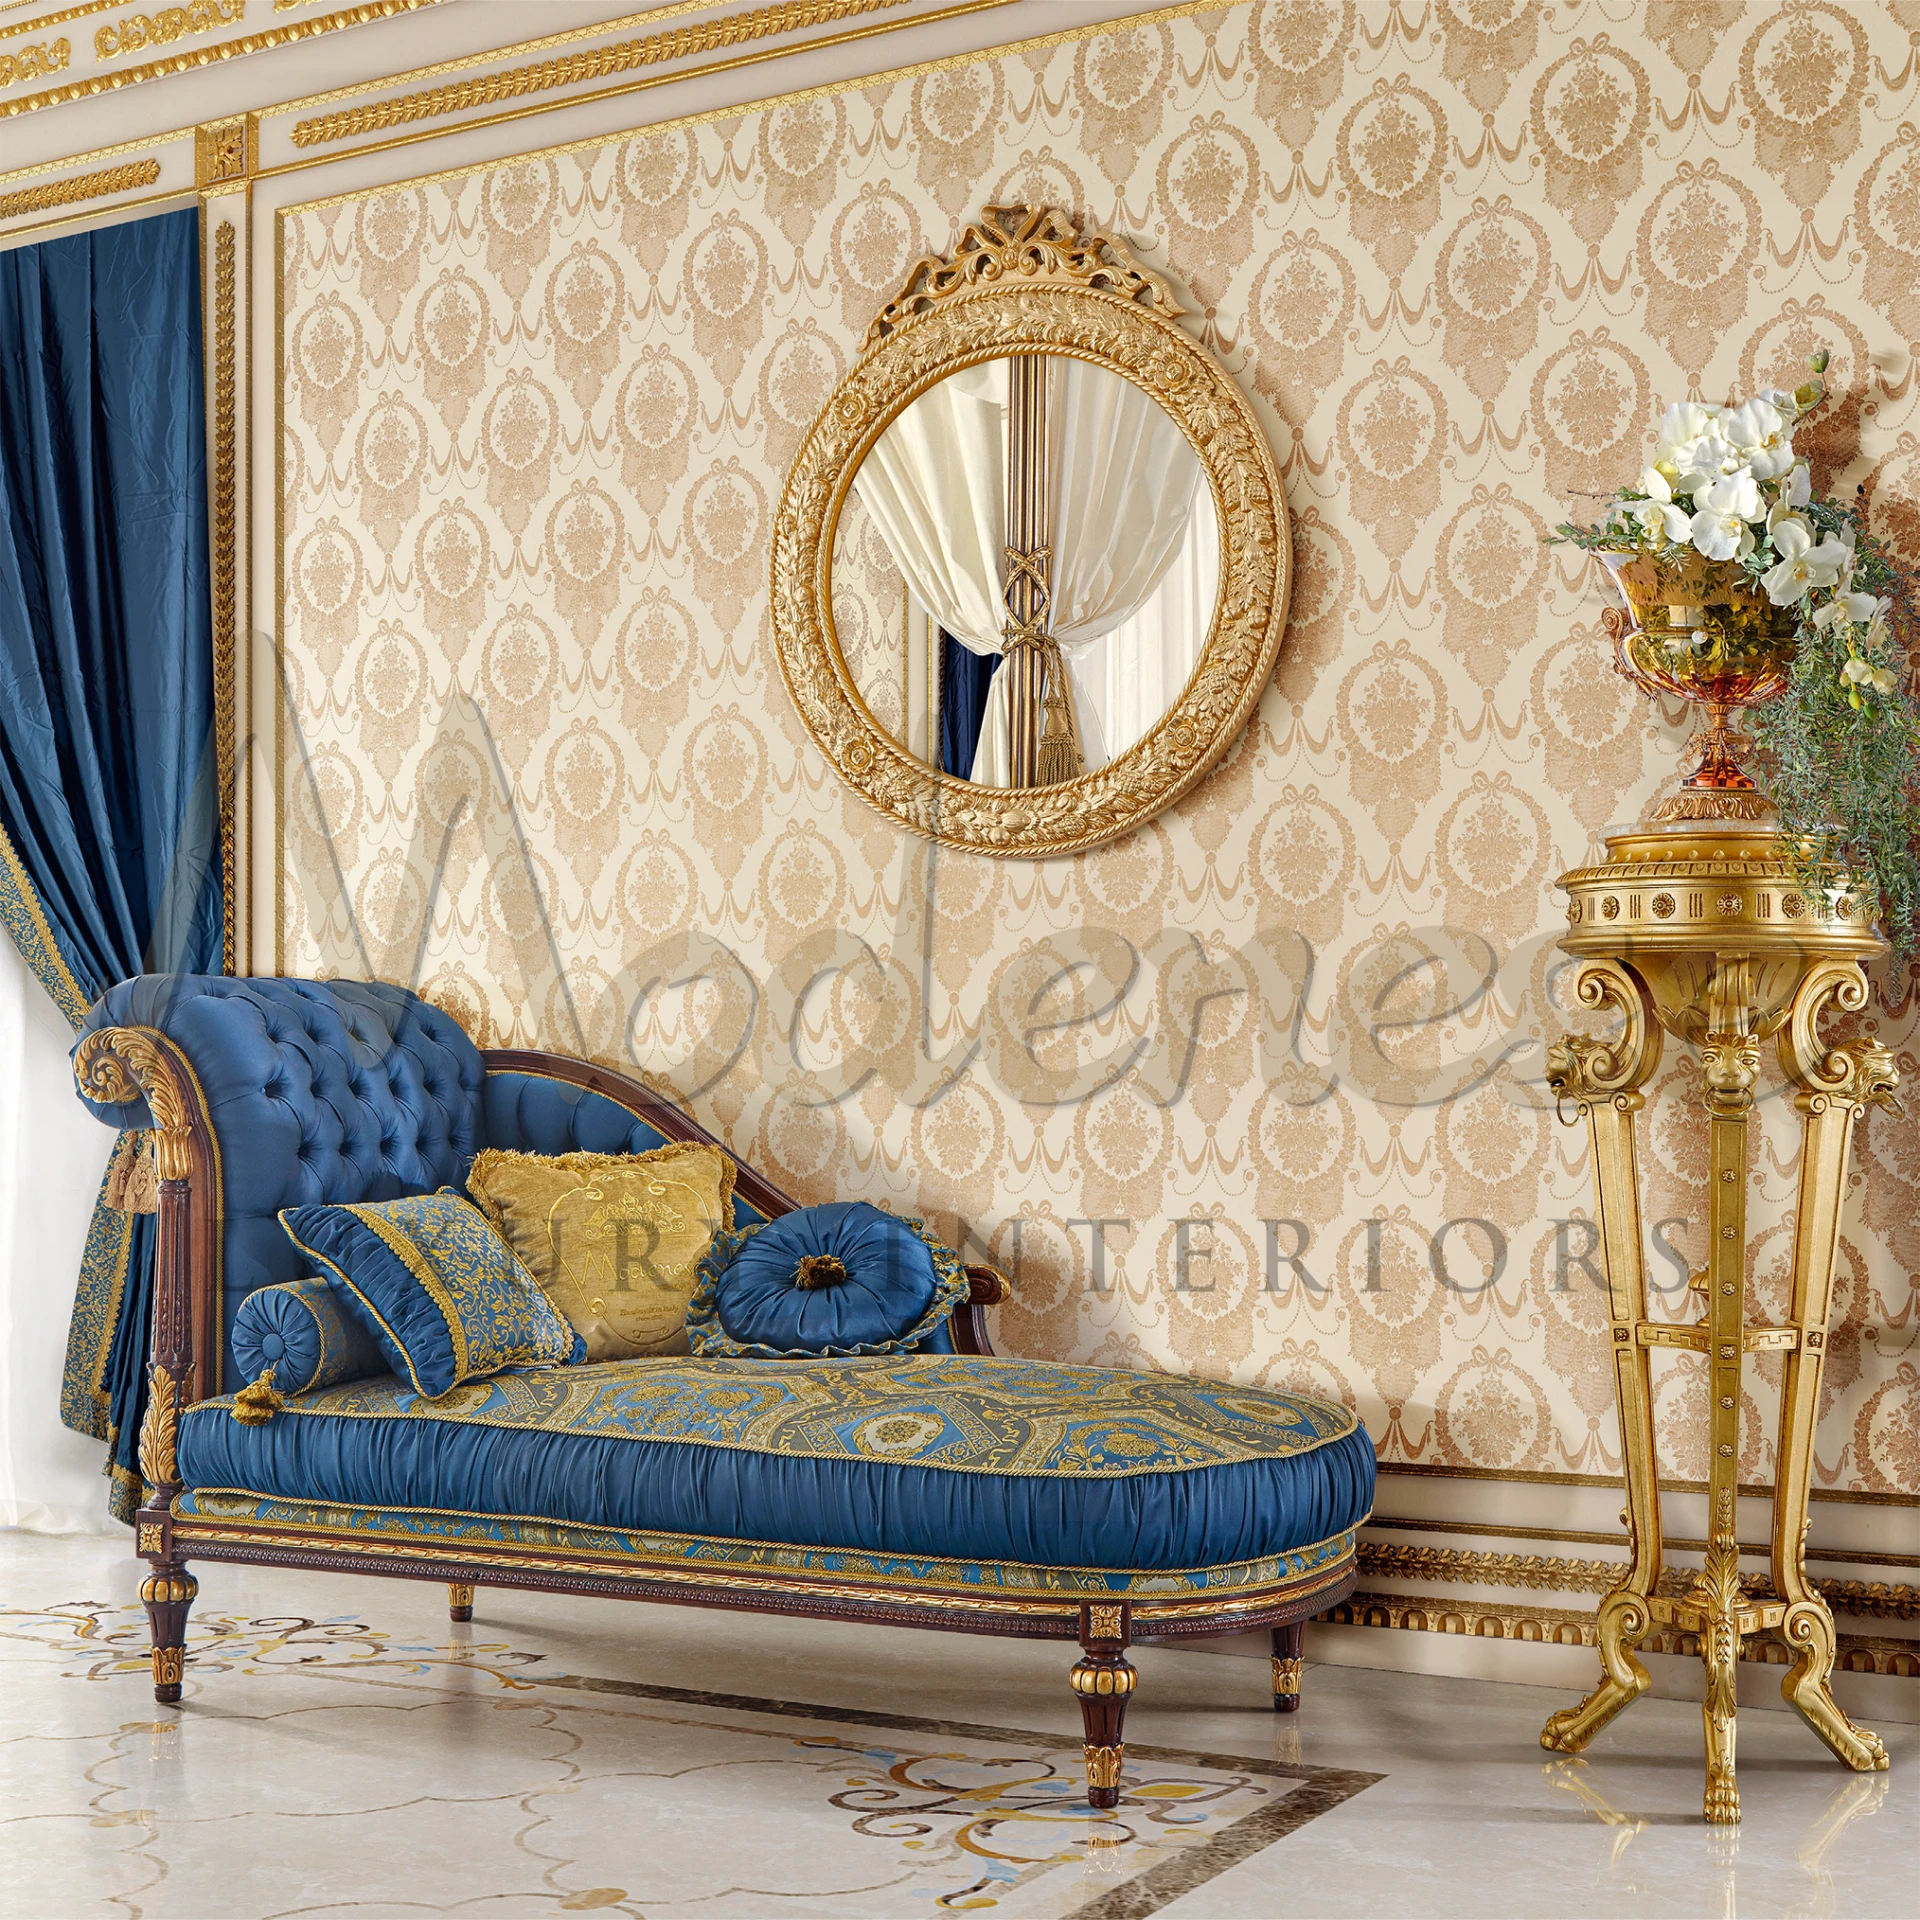 Luxury meets tradition in the Classical Round Blue Pillow, featuring Italian craftsmanship and timeless aesthetics."